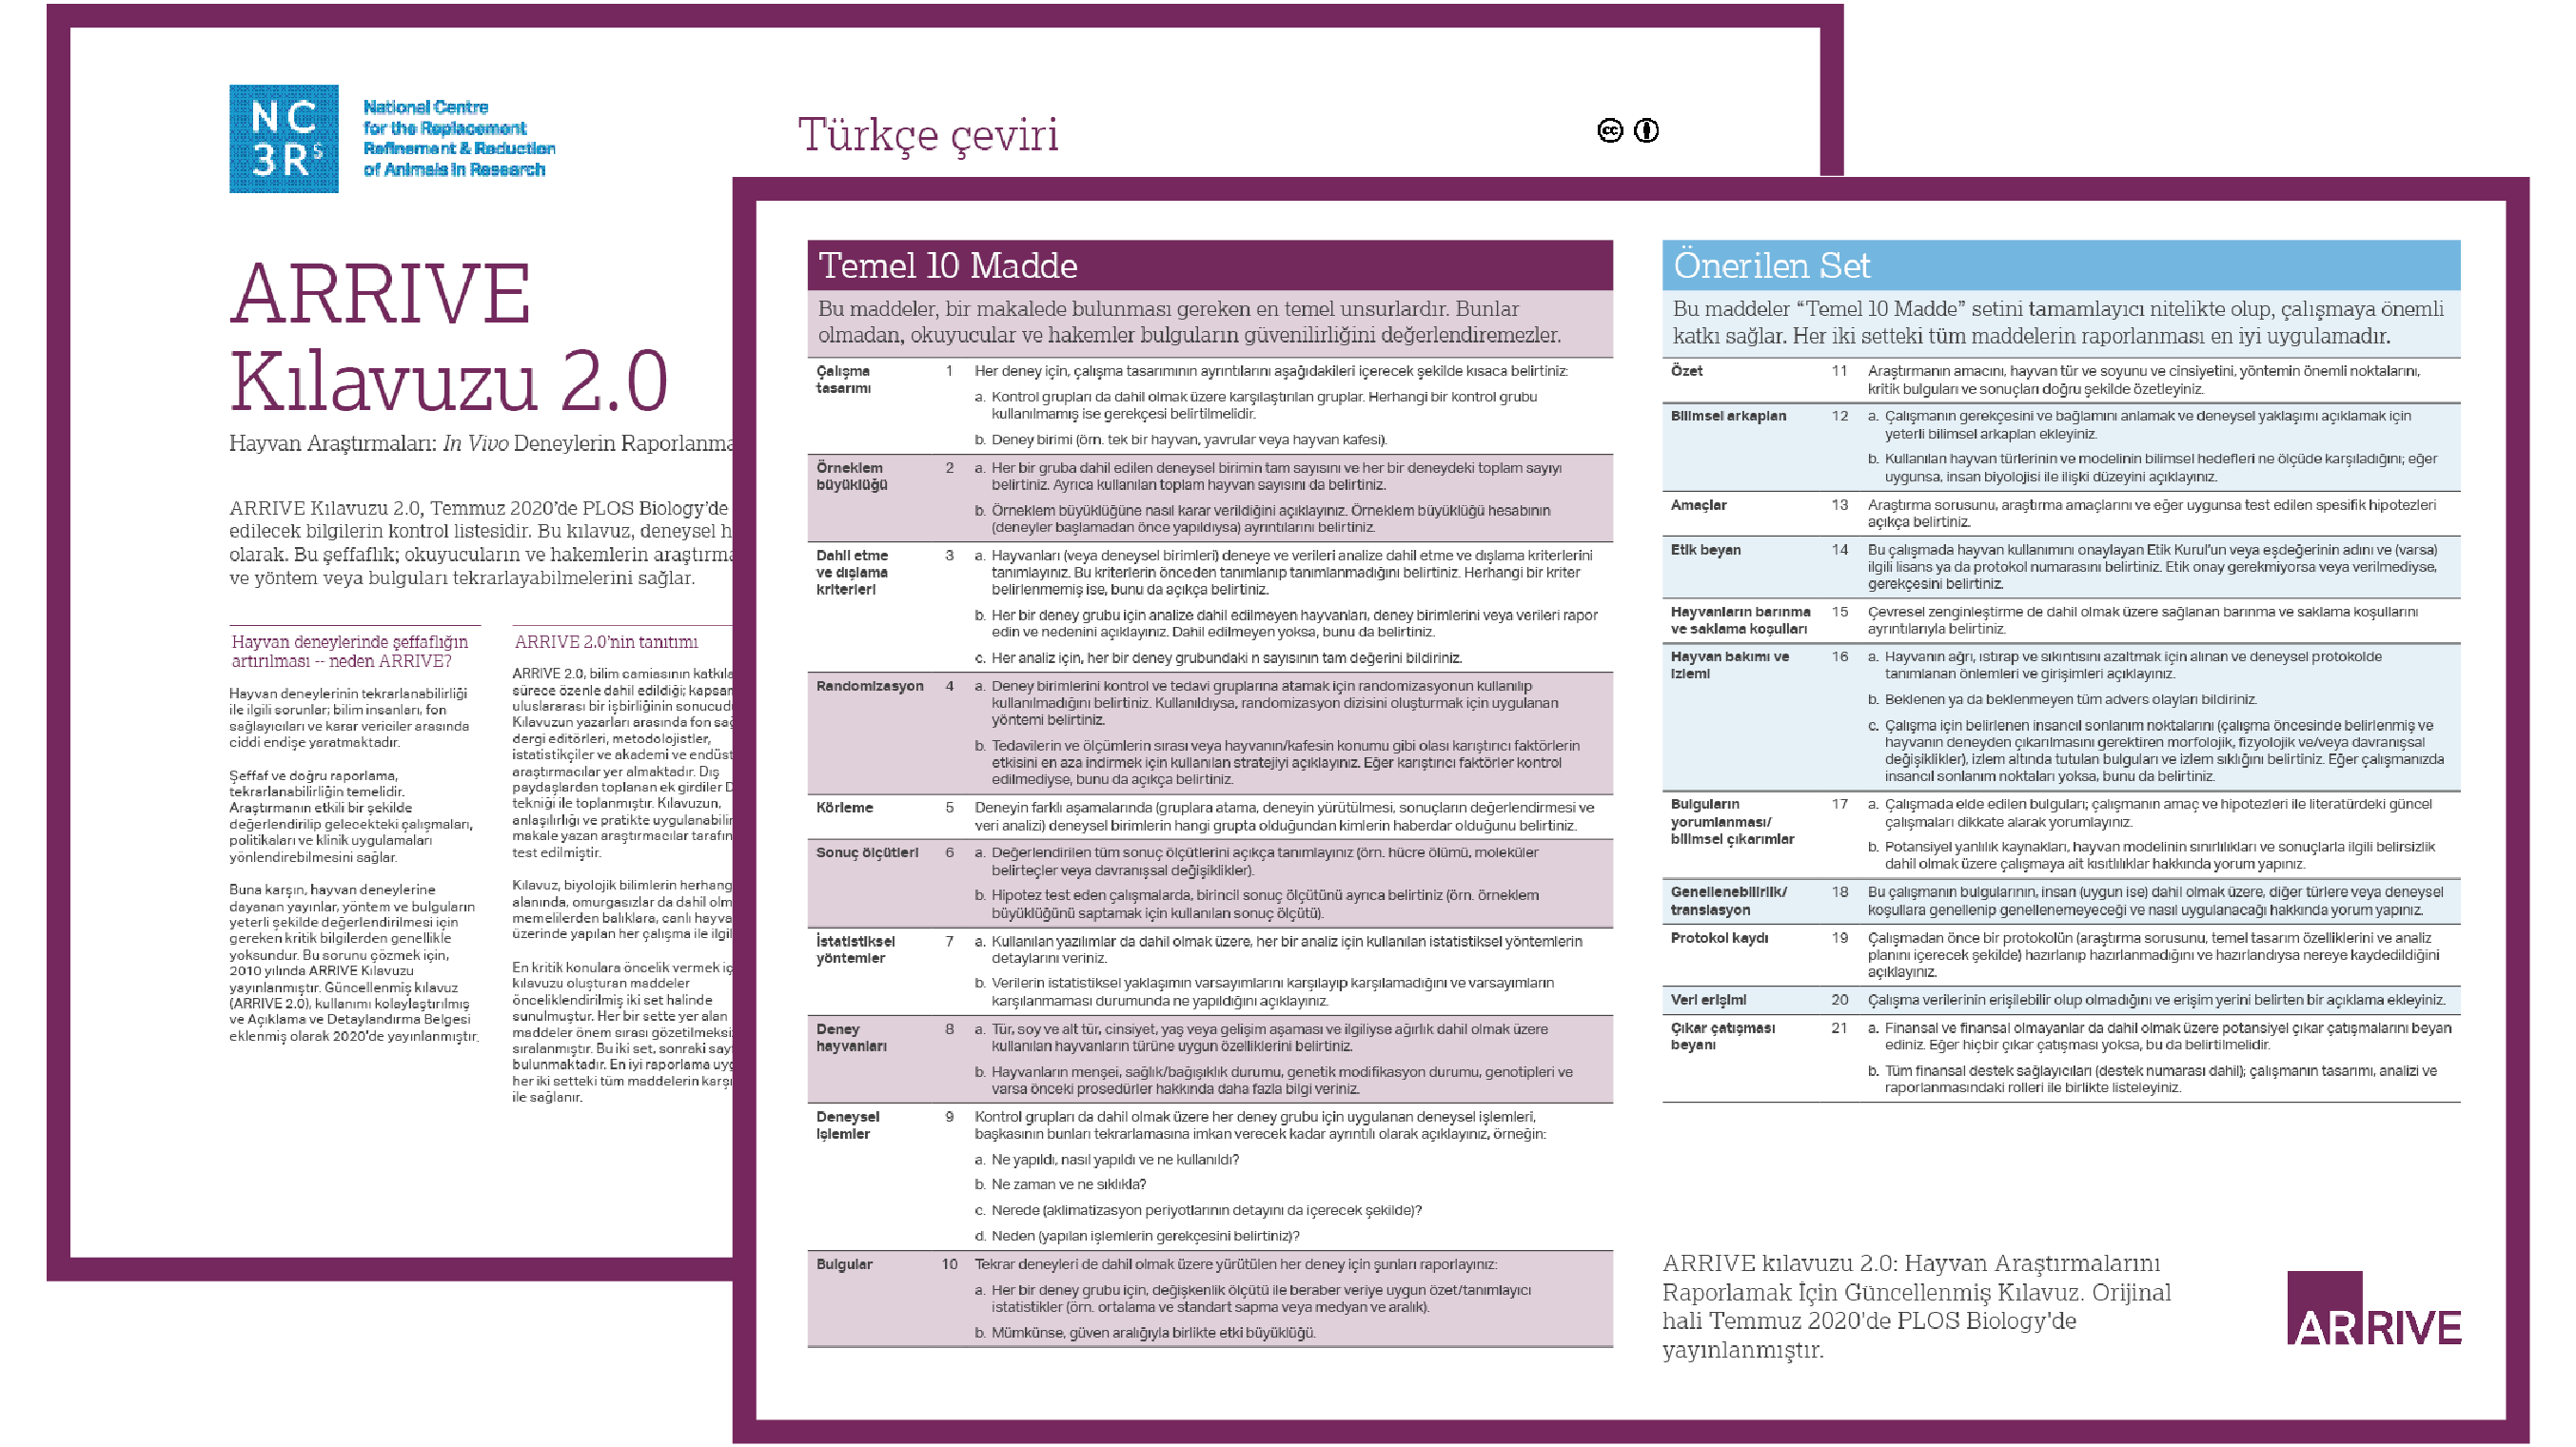 The ARRIVE guidelines in Turkish